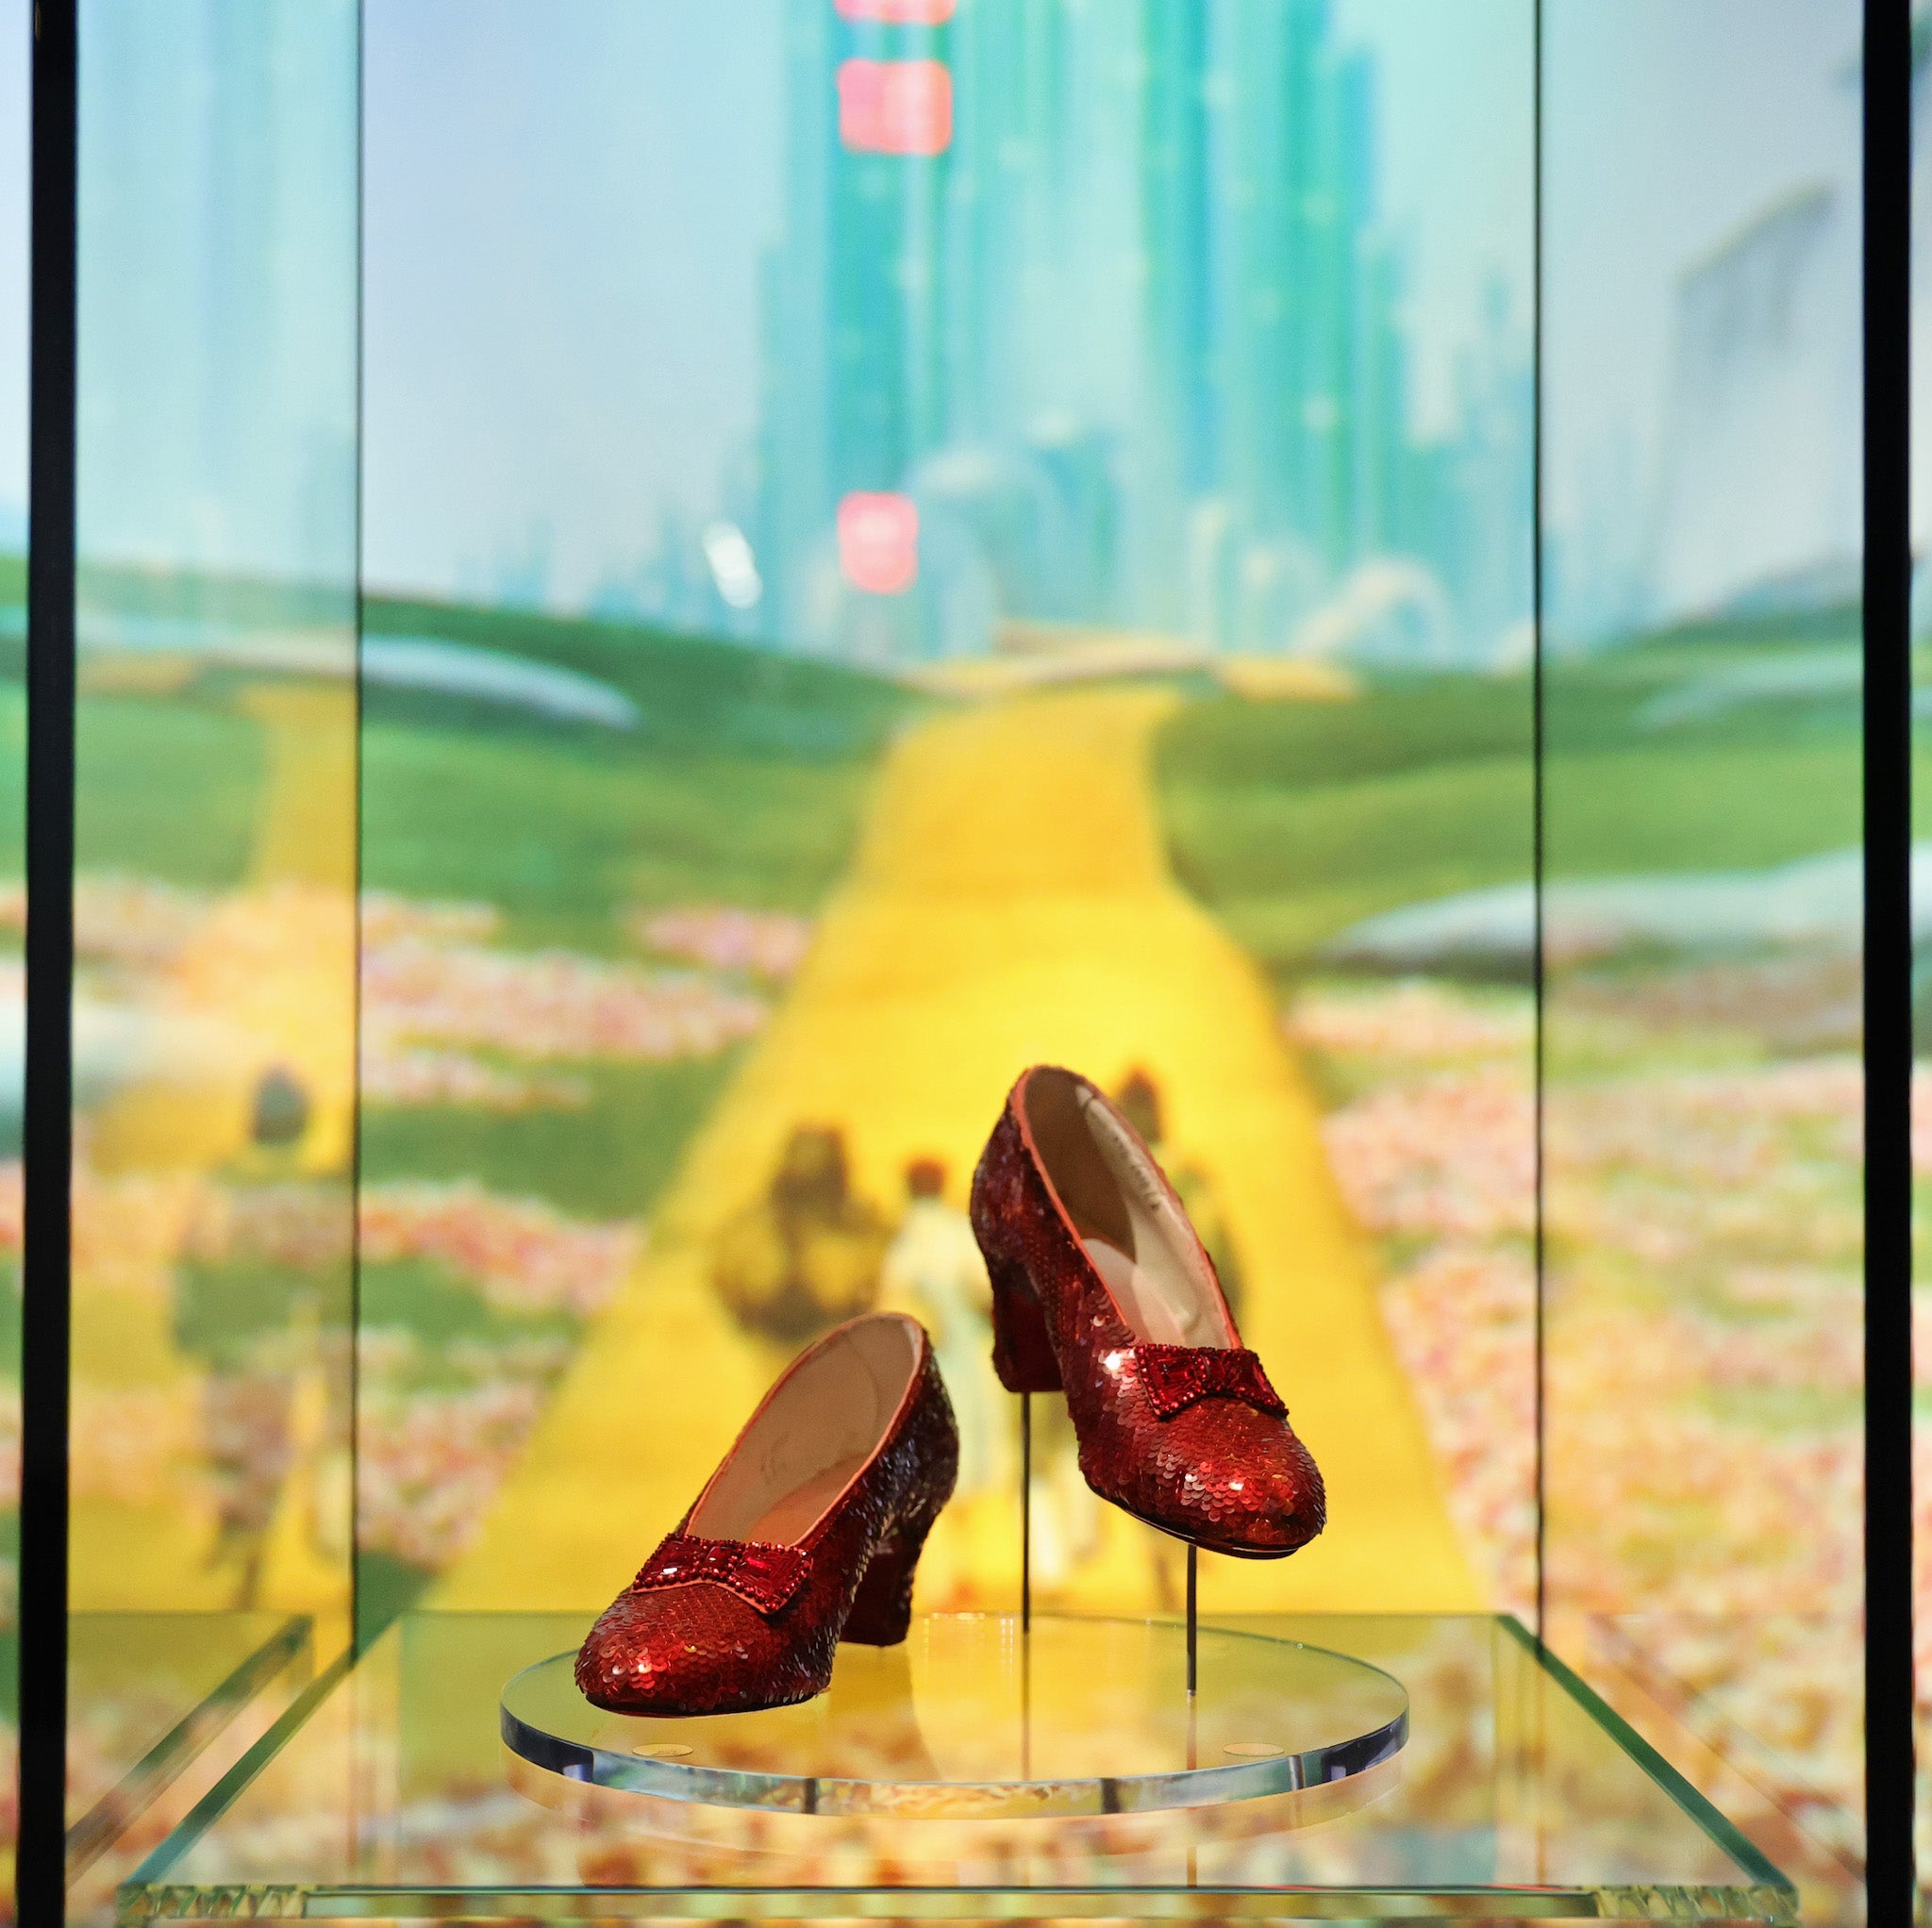 The museum delivers plenty of big-hitting props and artefacts, including the ruby slippers worn by Judy Garland as Dorothy in The Wizard of Oz